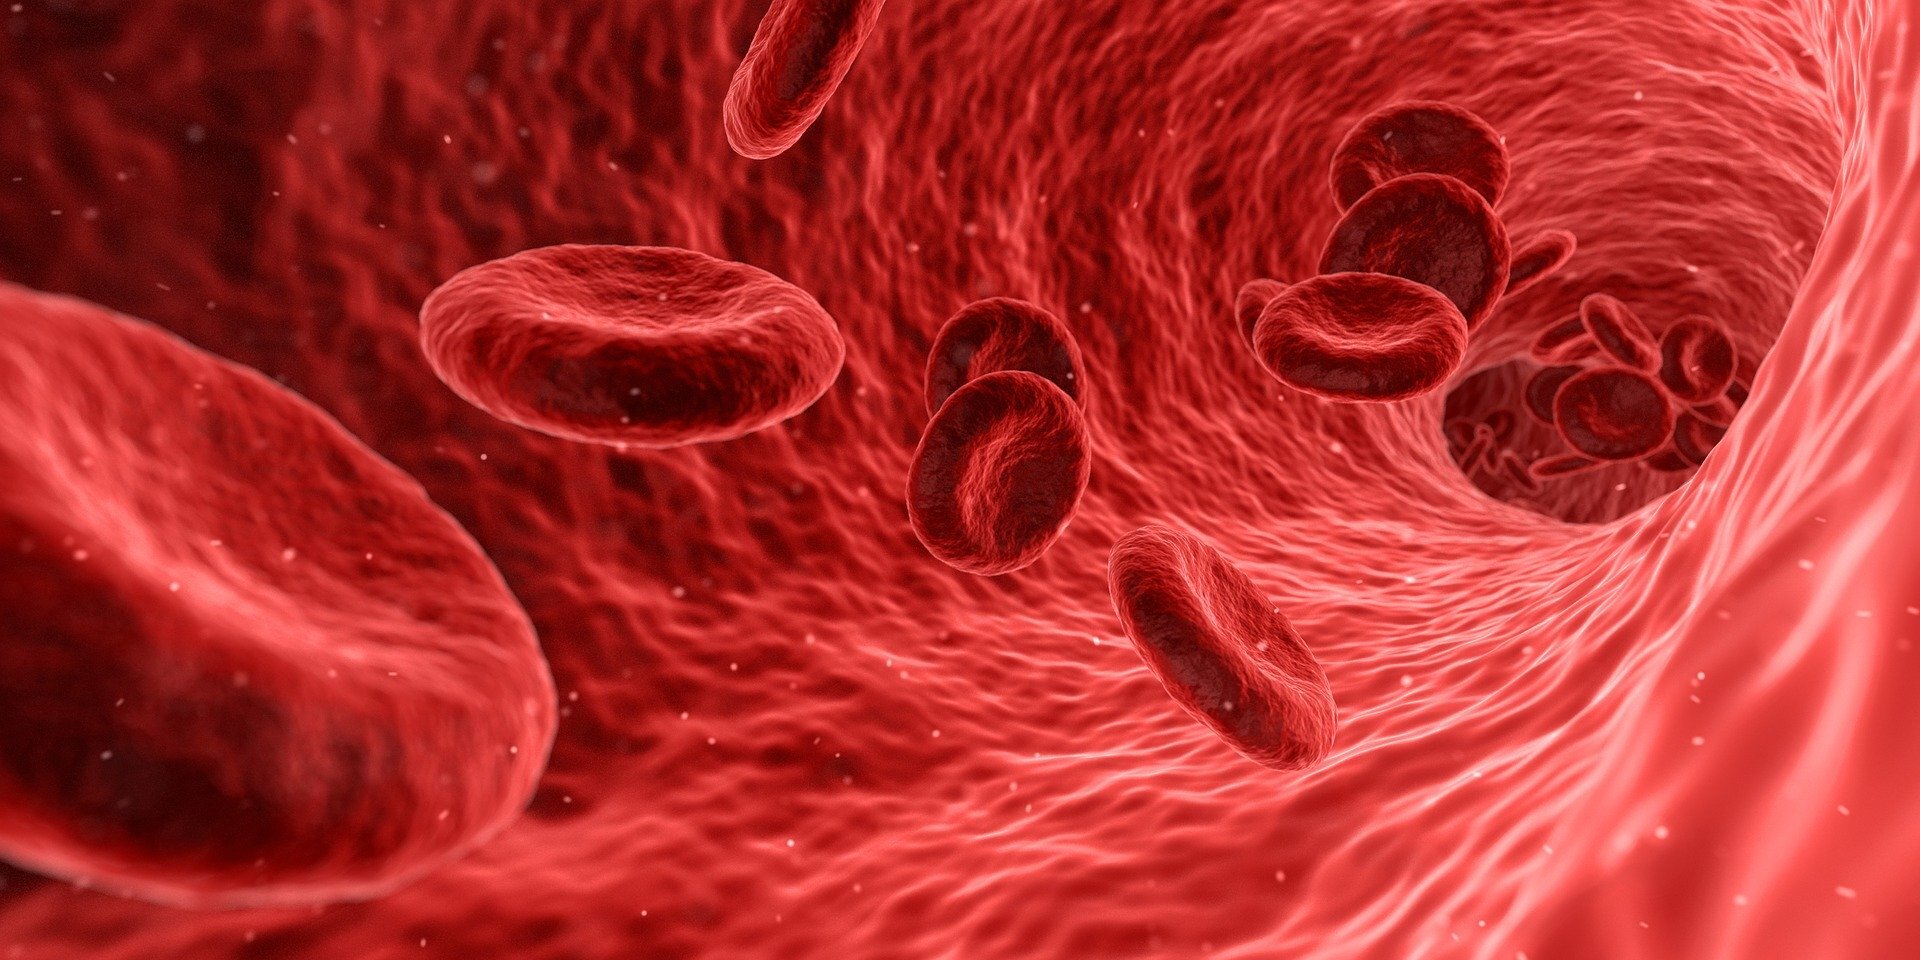 Researchers reveal new strategy to prevent blood clots without increasing the risk of bleeding